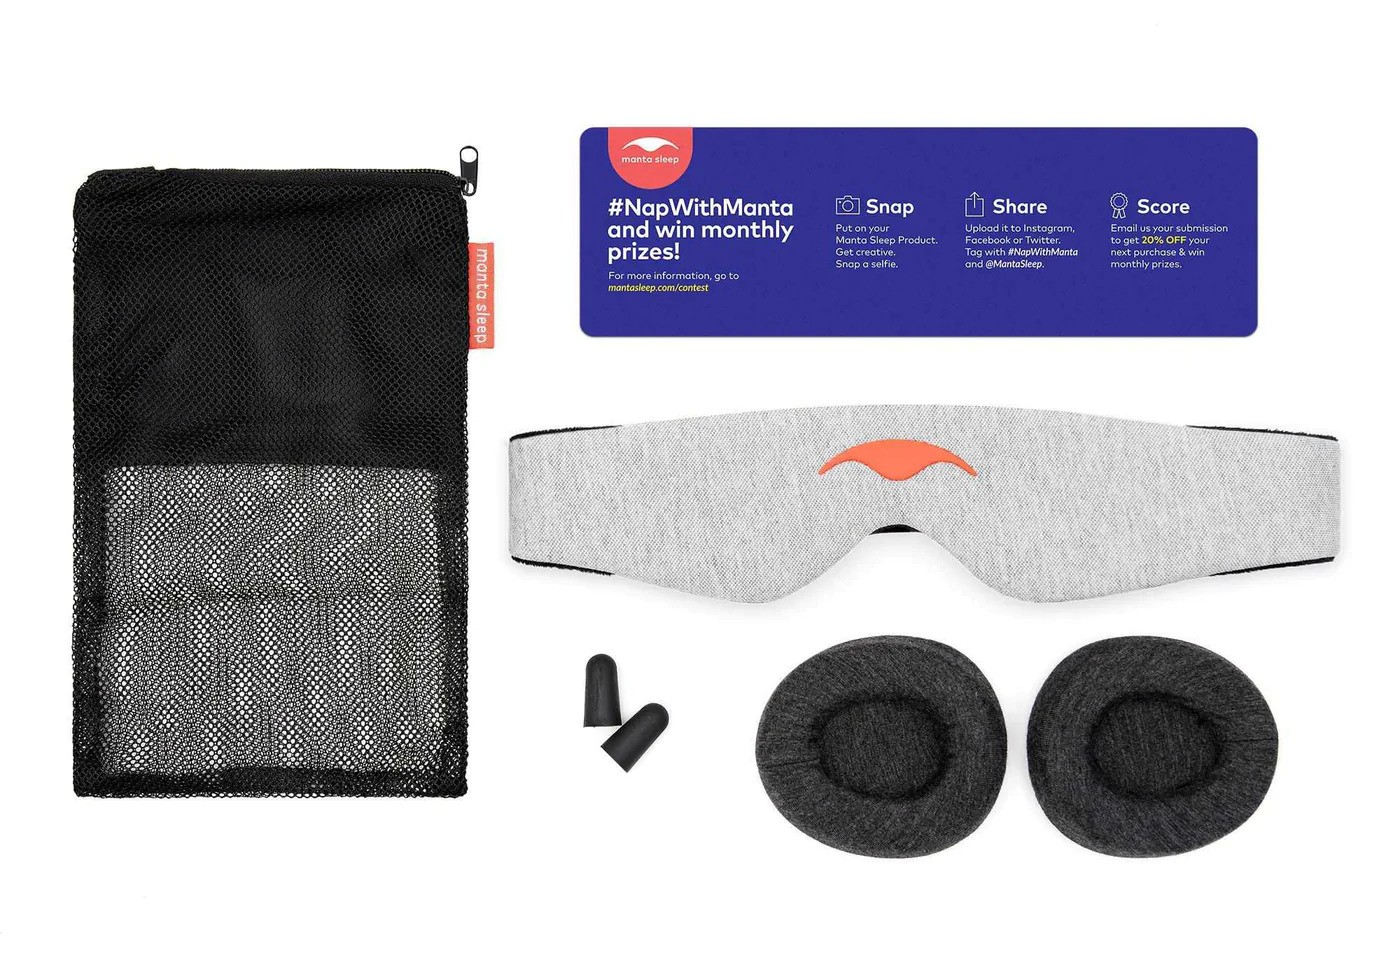 A black mesh laundry case, a gray head strap, dark gray eye cups, a set of foam ear plugs and an instruction manual for a sleep mask from Manta Sleep.